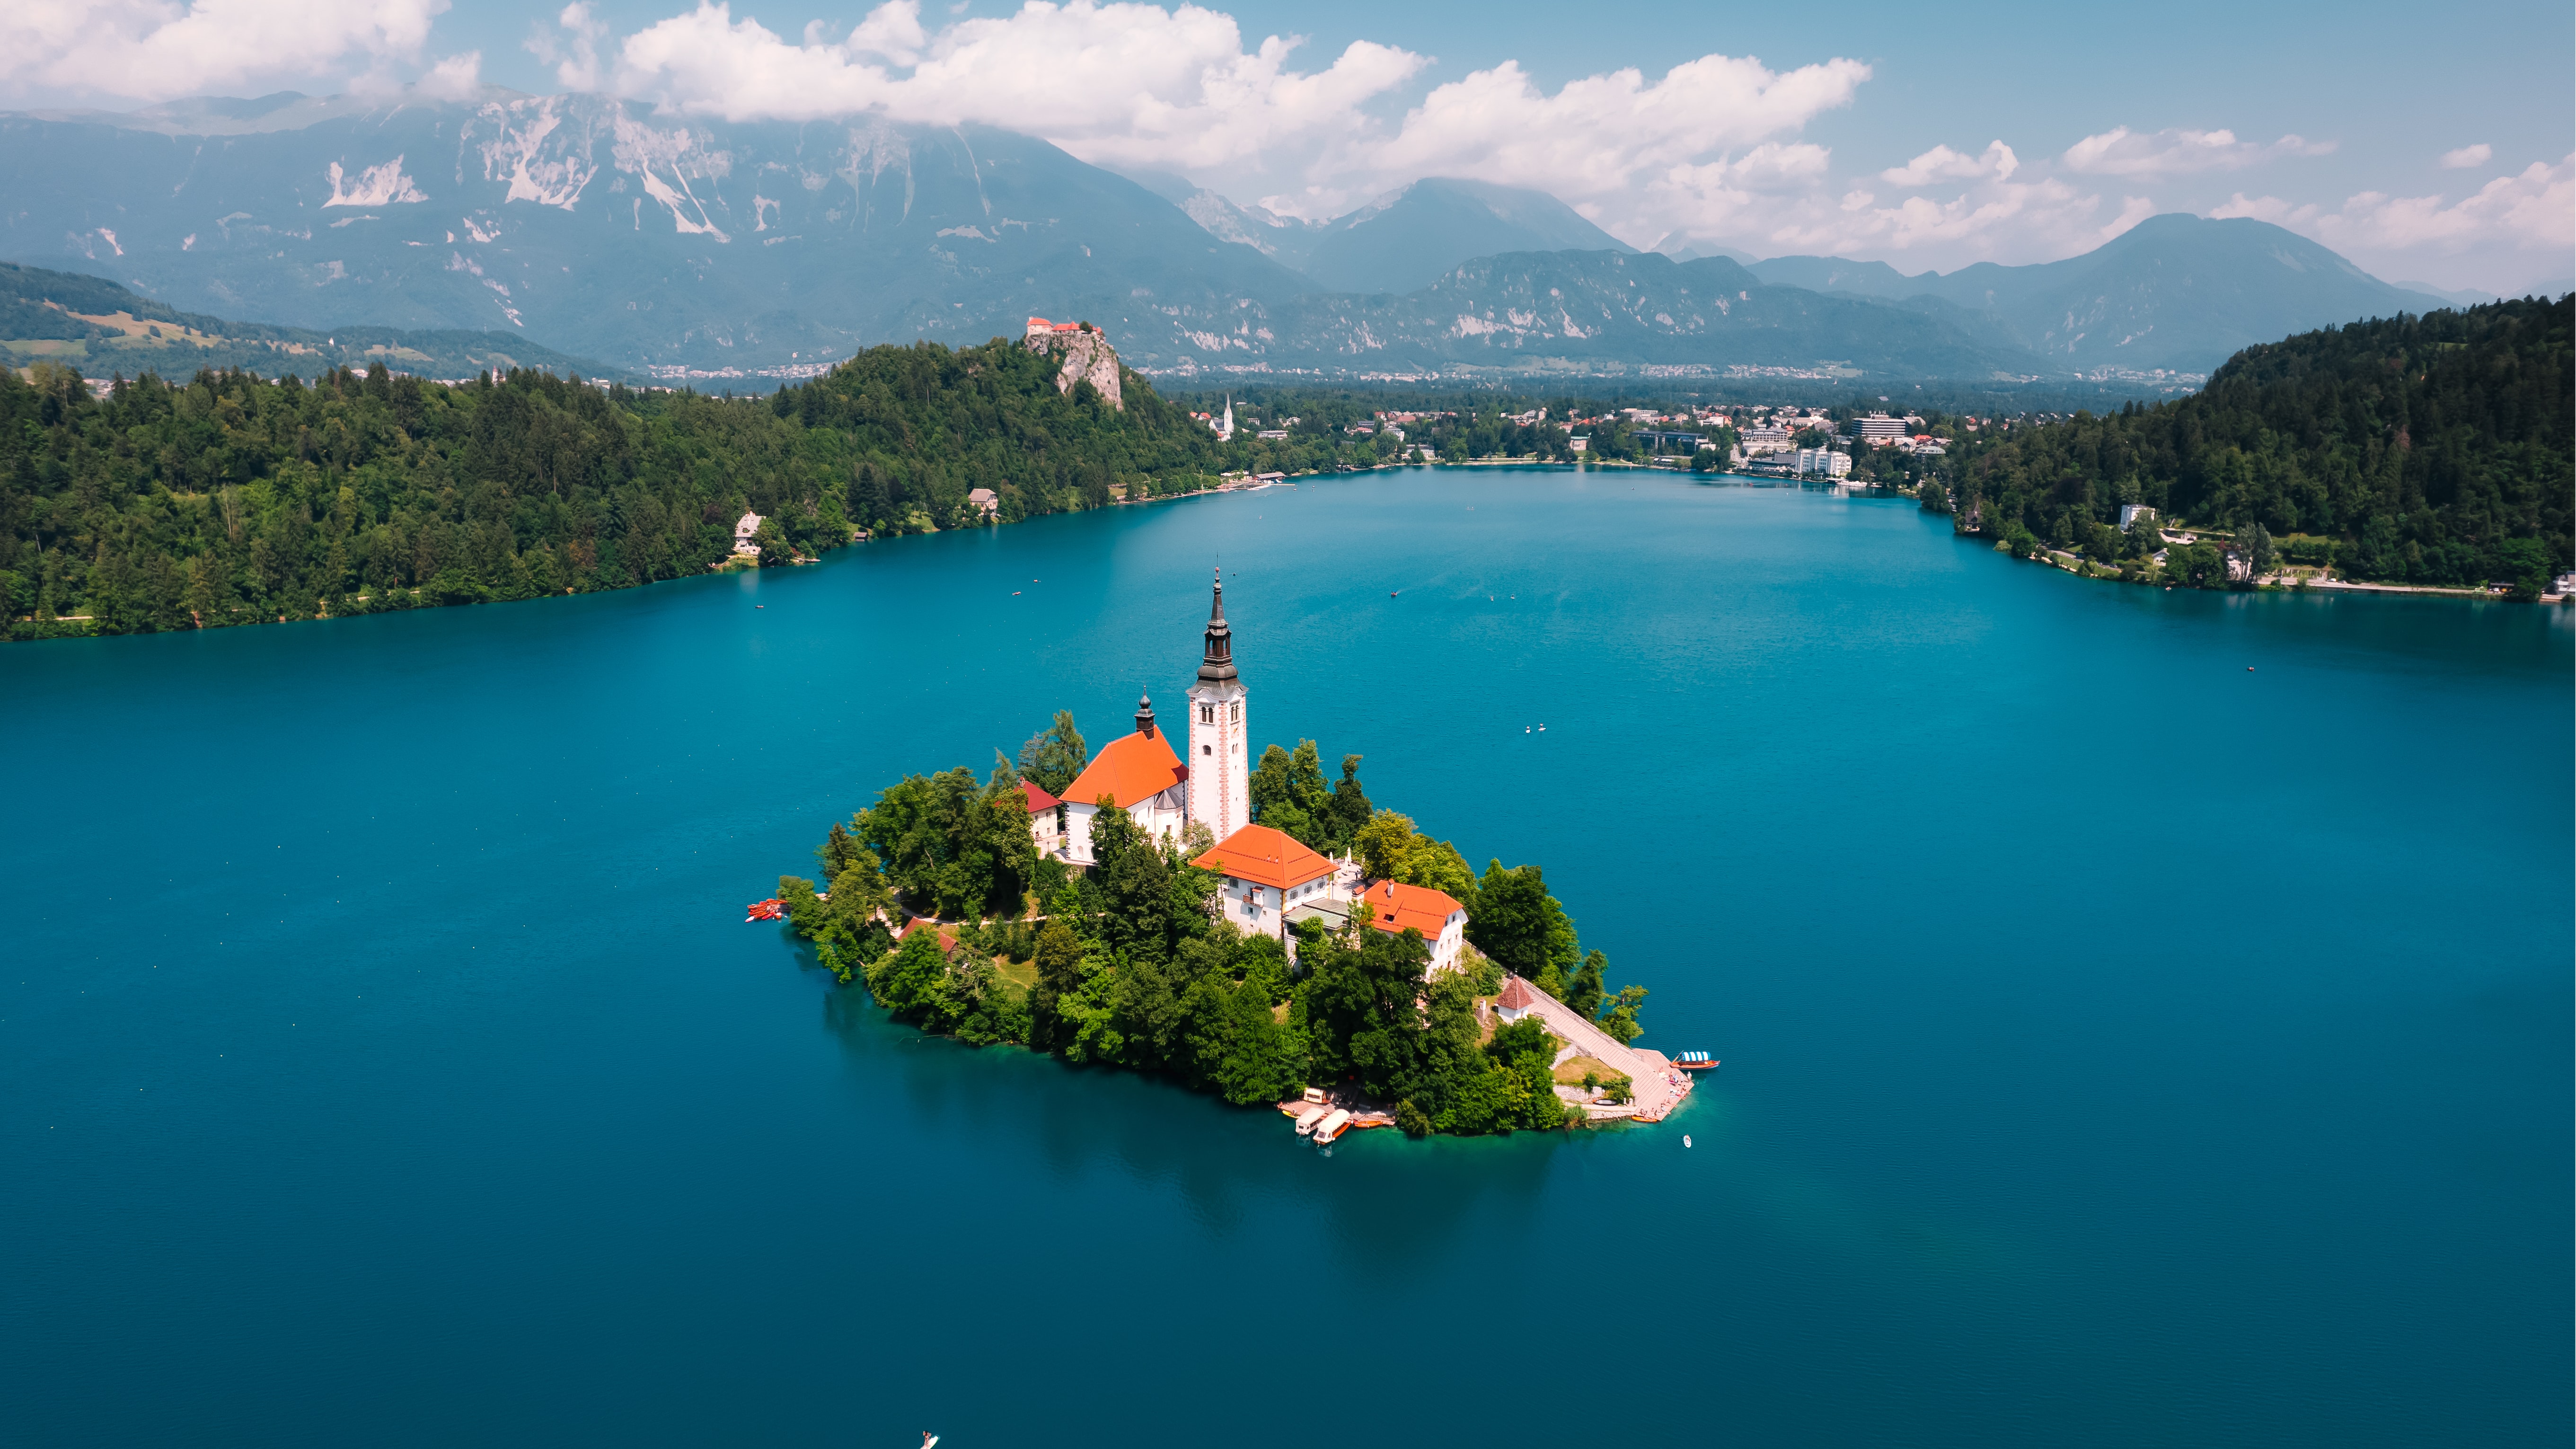 Bled, a Slovenian resort town in the foothills of the Julian Alps by Martin Katler